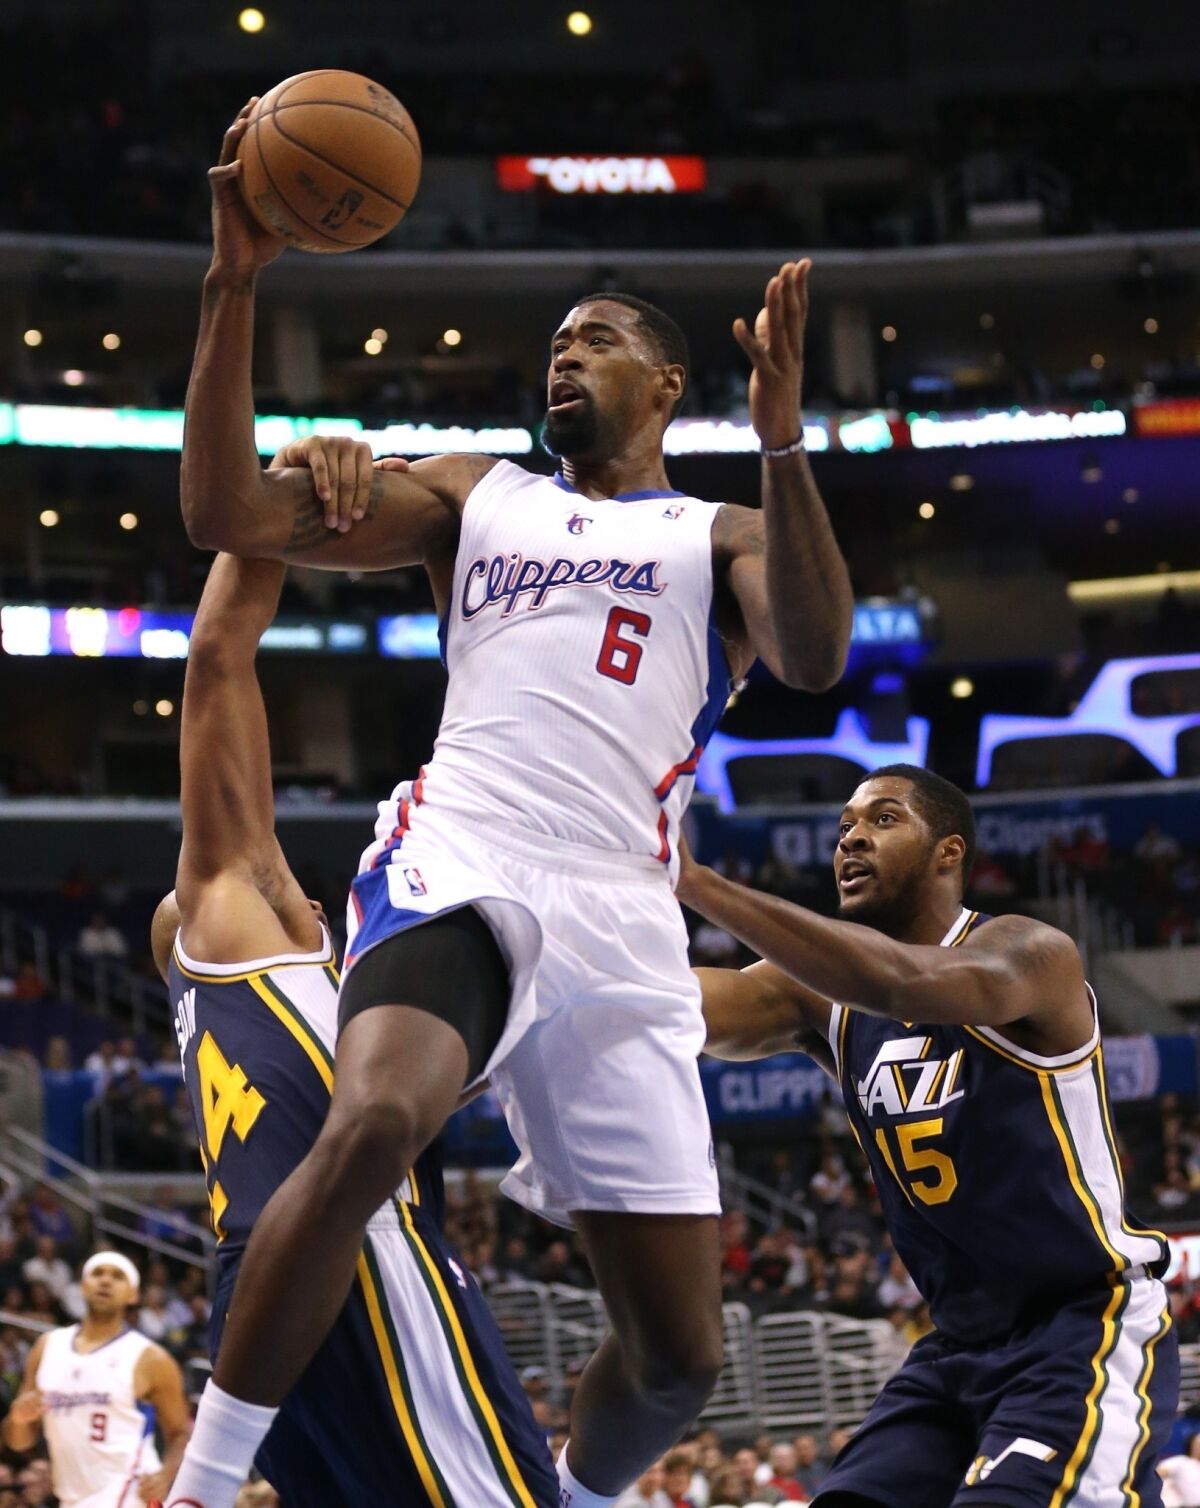 Clippers center DeAndre Jordan says the media wants to see a Clippers-Lakers rivalry.